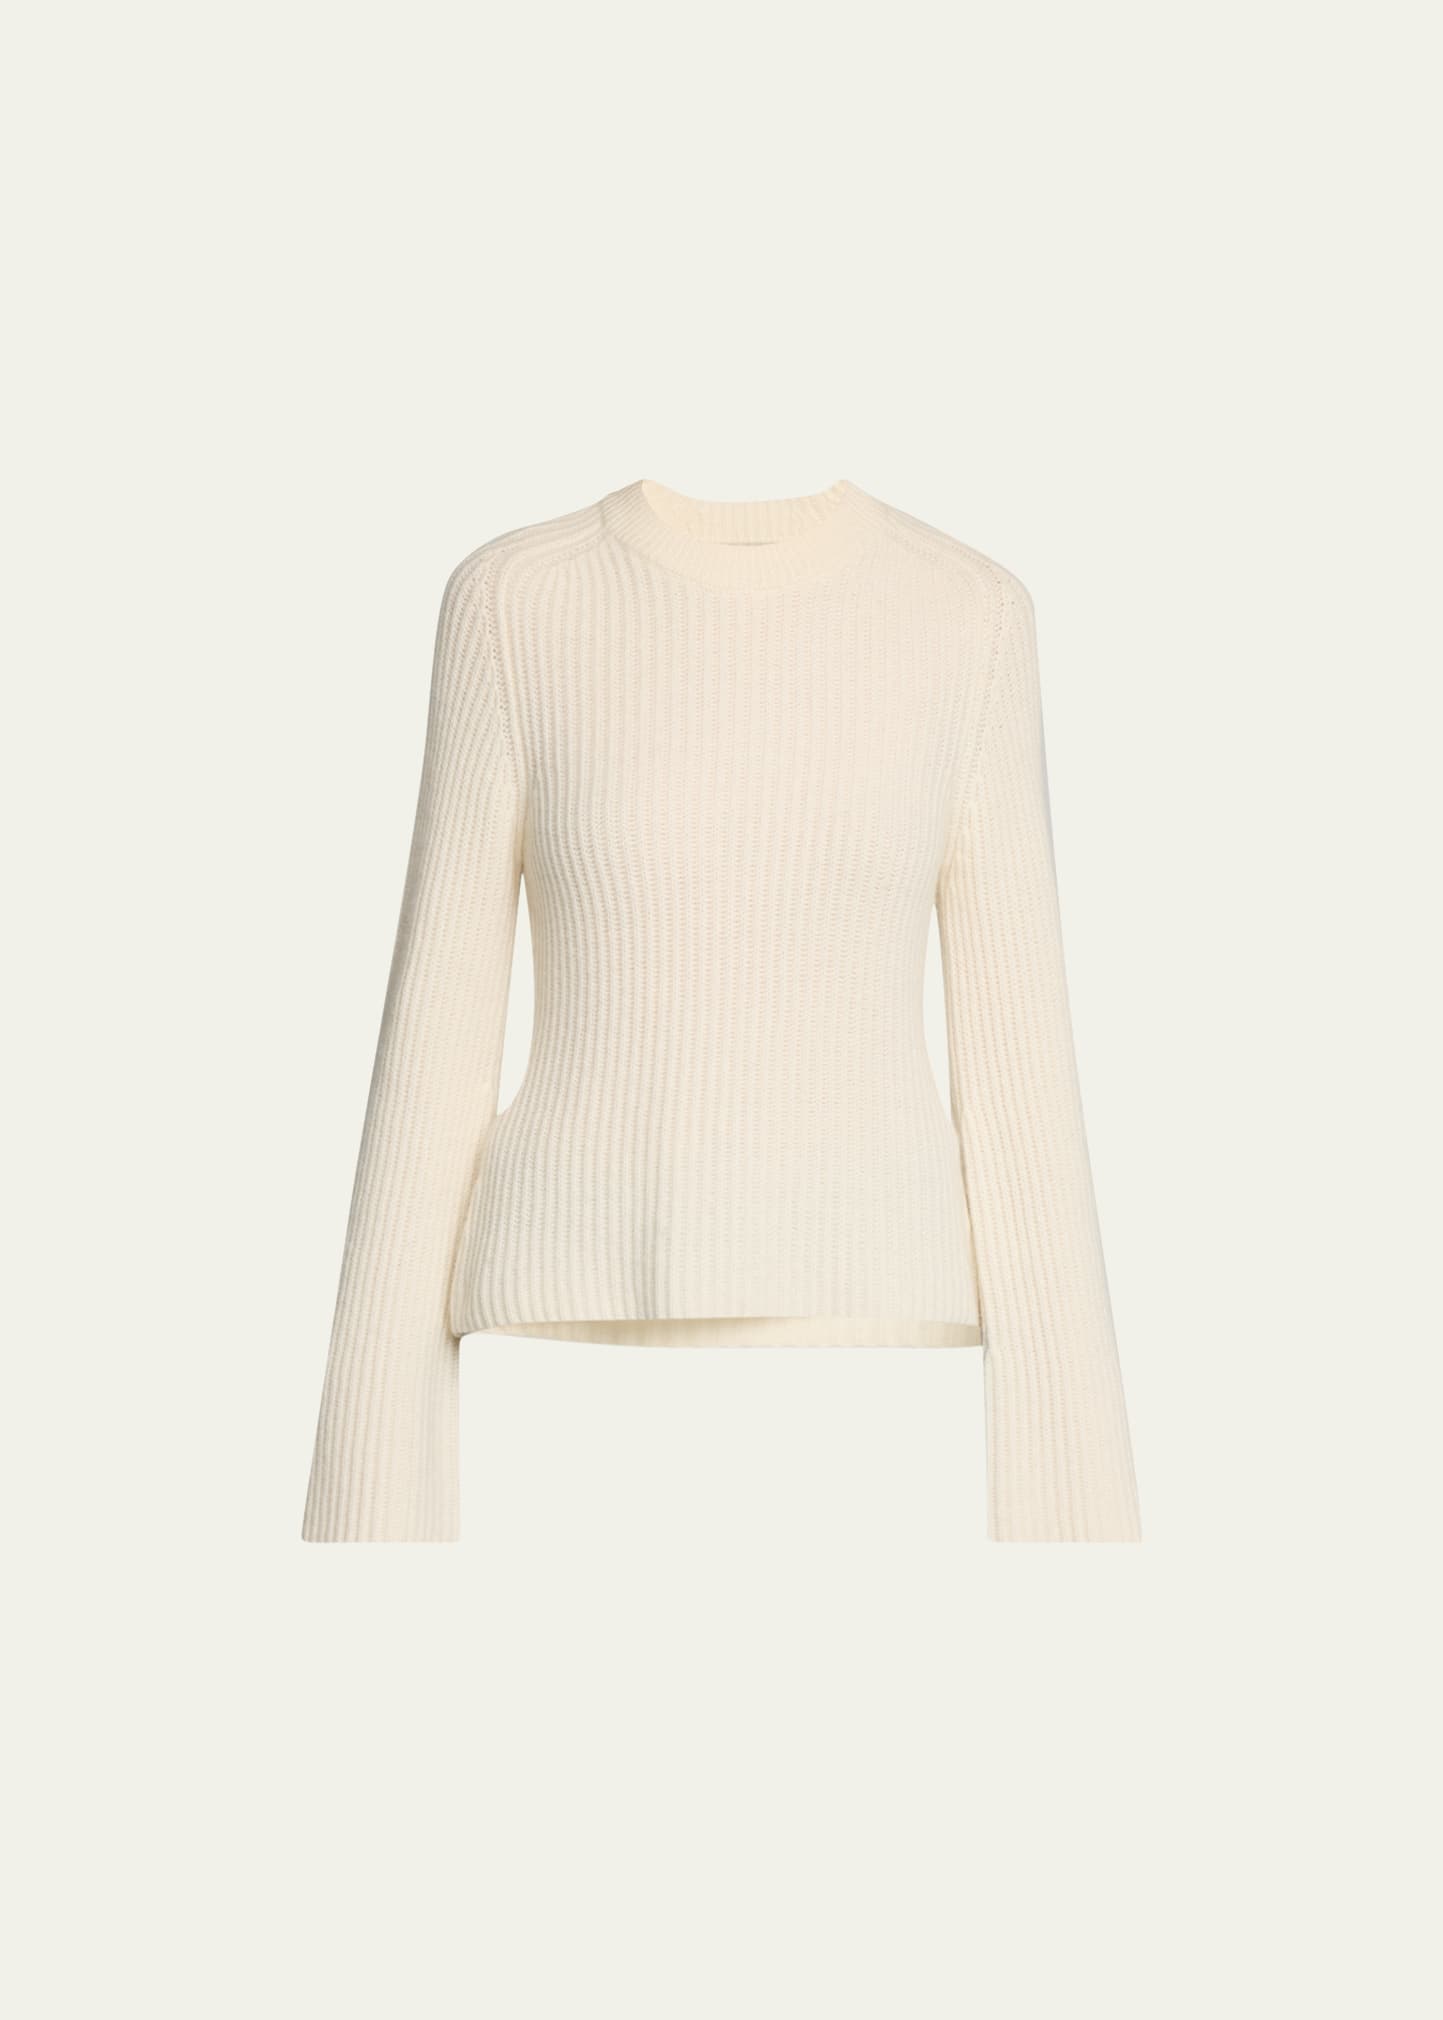 Loulou Studio Kota Ribbed Cashmere Sweater In Ivory